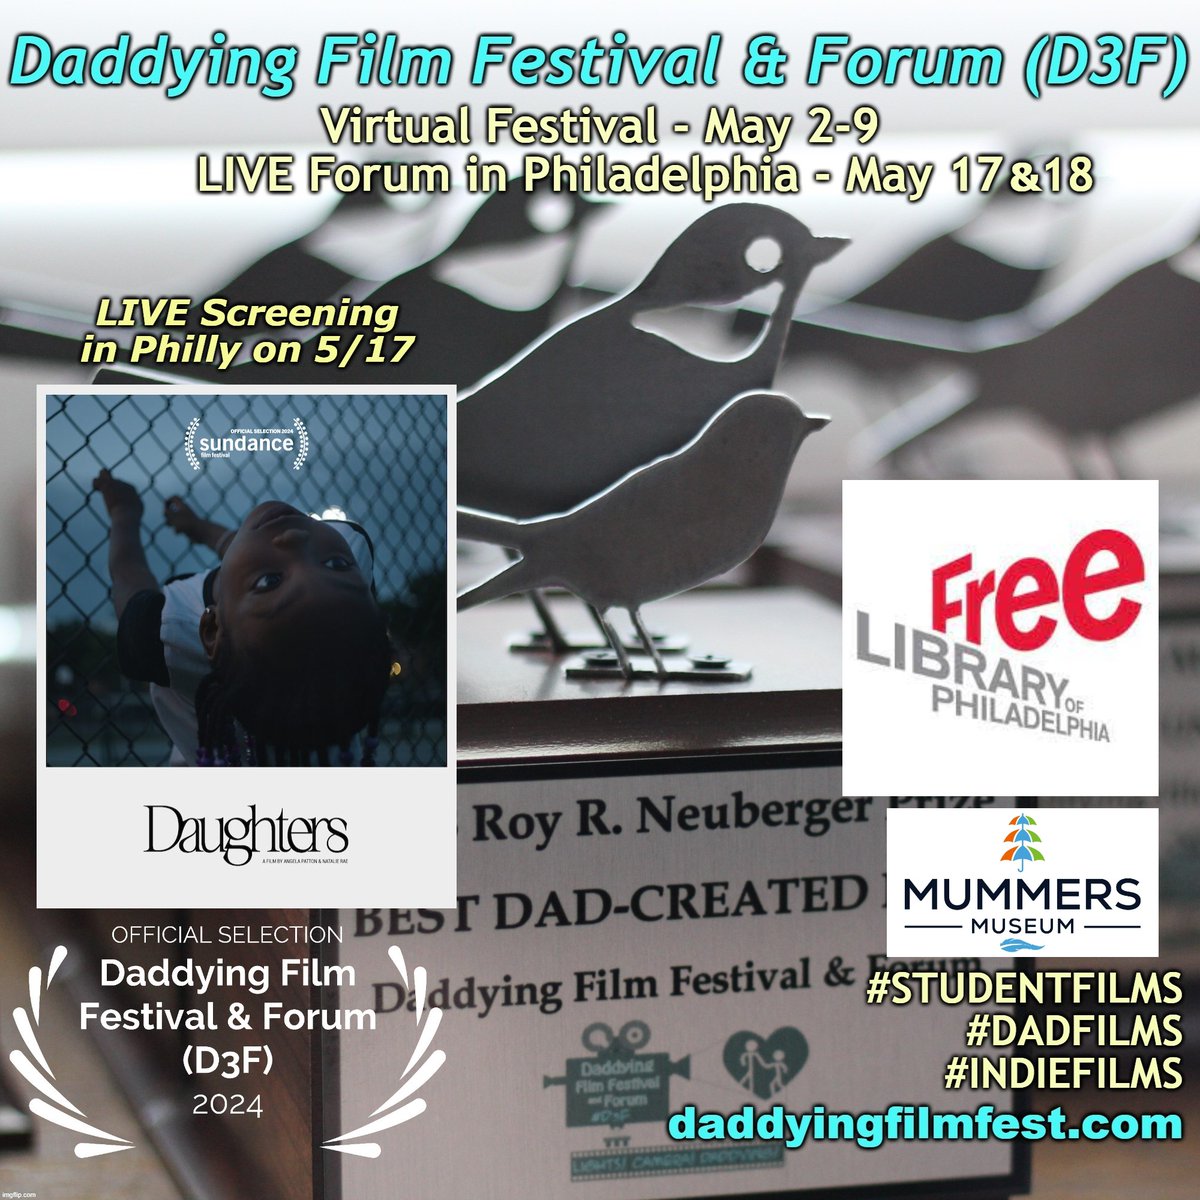 3RD ANNUAL D3F IS OPEN! FREE unlimited passes enable you to stream 40+ shorts/features celebrating involved dads NOW thru MAY 9! FREE PASSES: daddyingfilmfest.com/get-free-passes #FilmFestival #dadlife @Fathersincorp @ArtEddy3 @ParentCamp @GPFO @HSFilmFest @equimundo_org @KidsFirstMedia